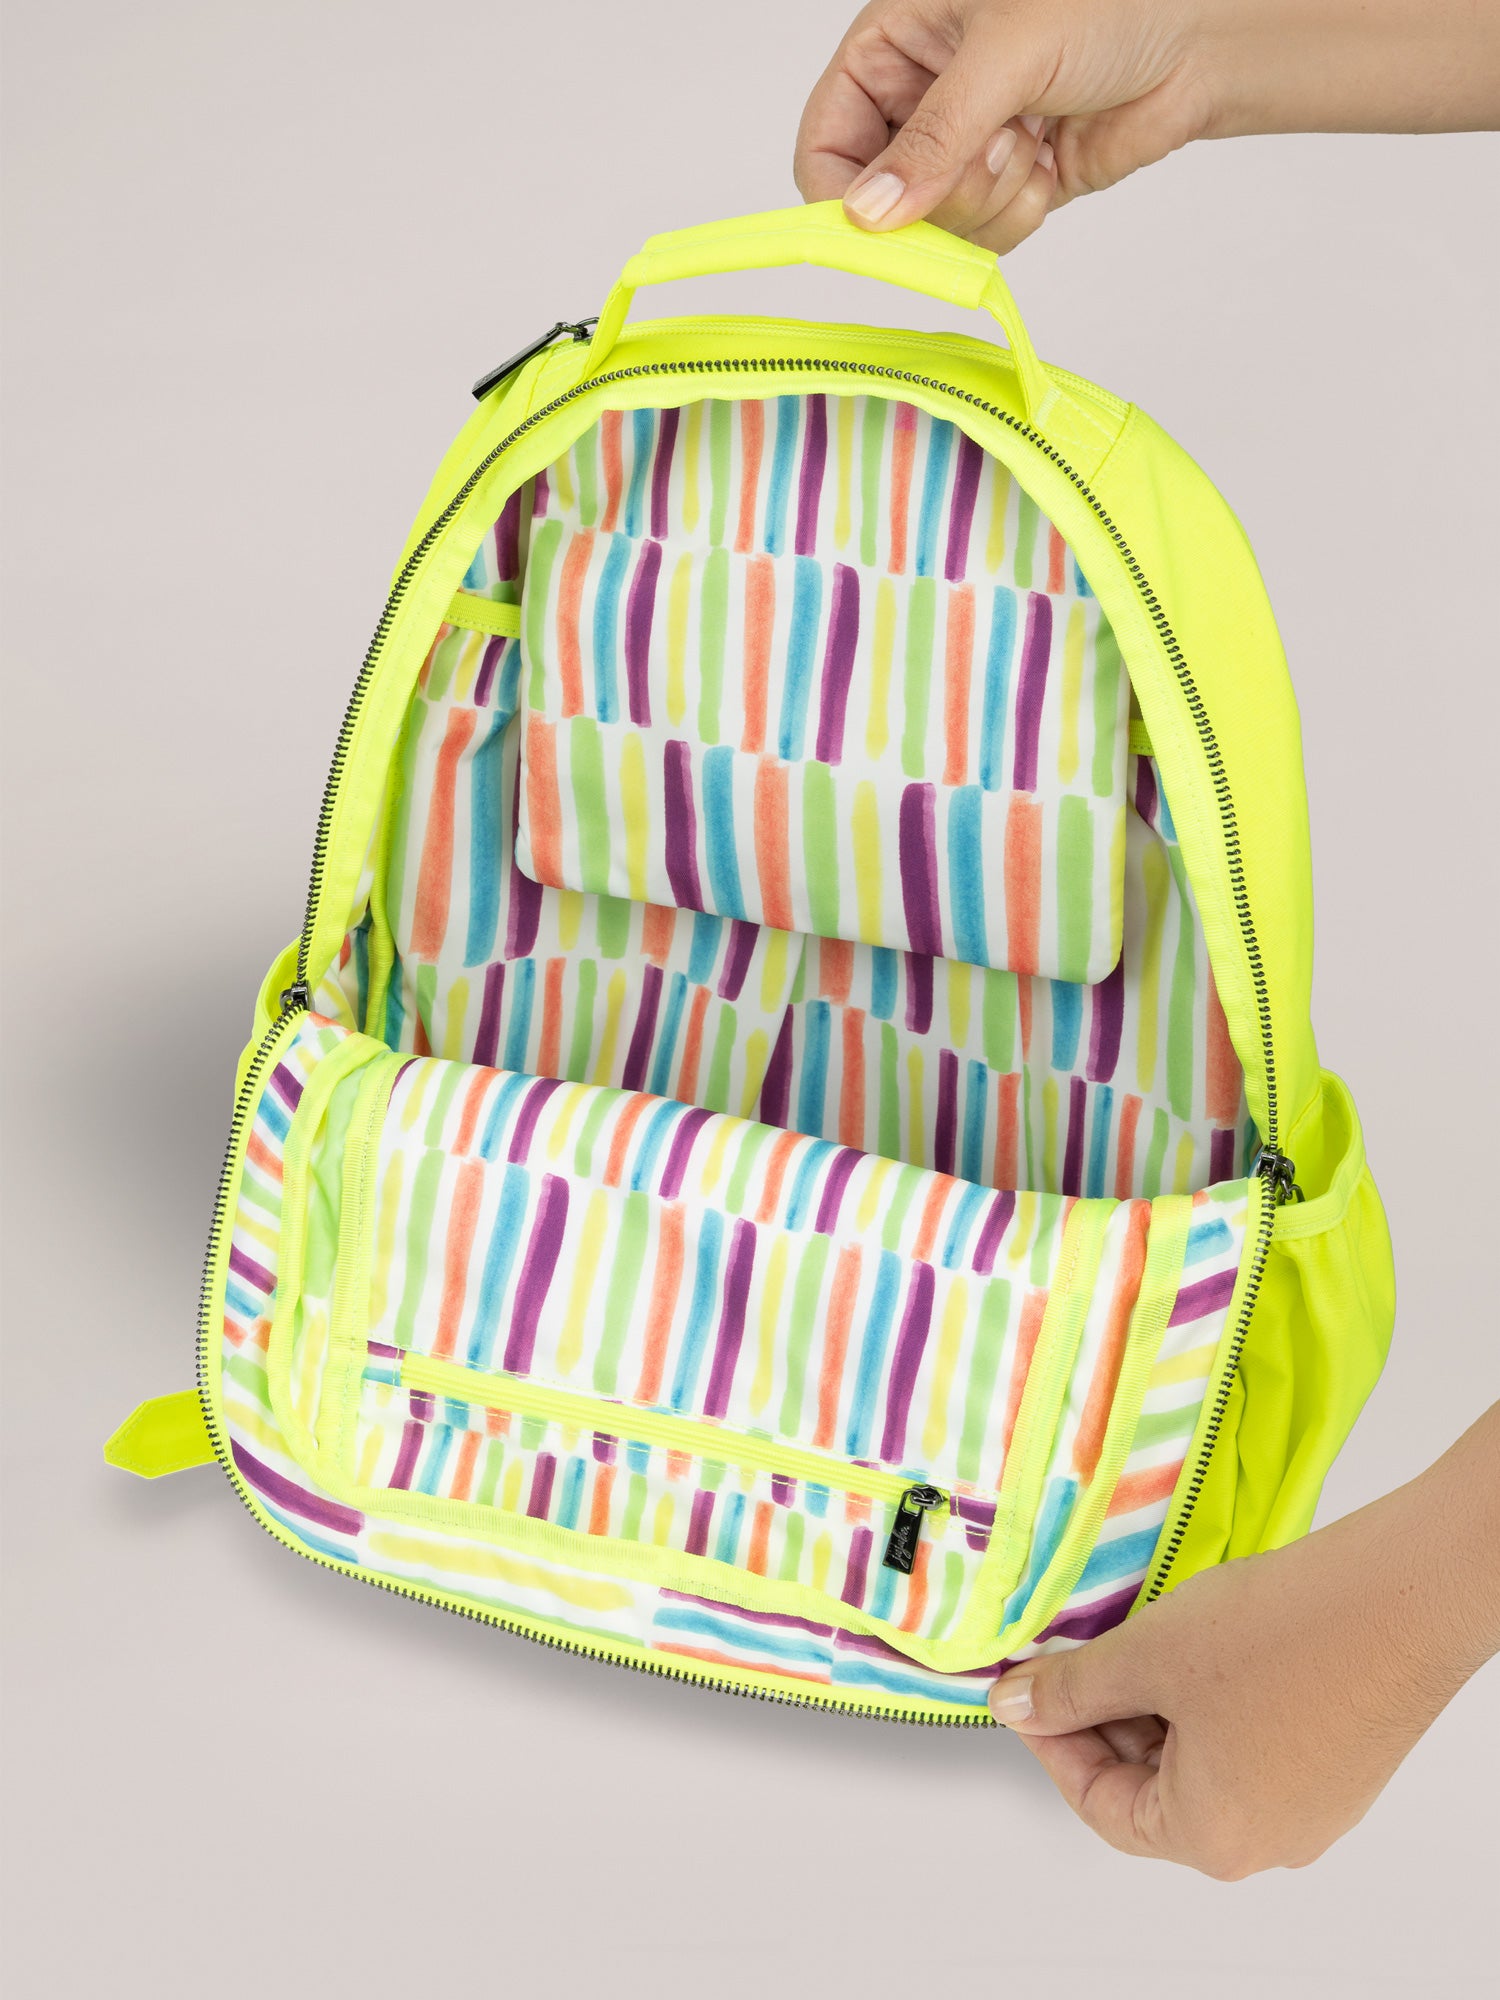 Neon Yellow Be Packed Backpack Interior View